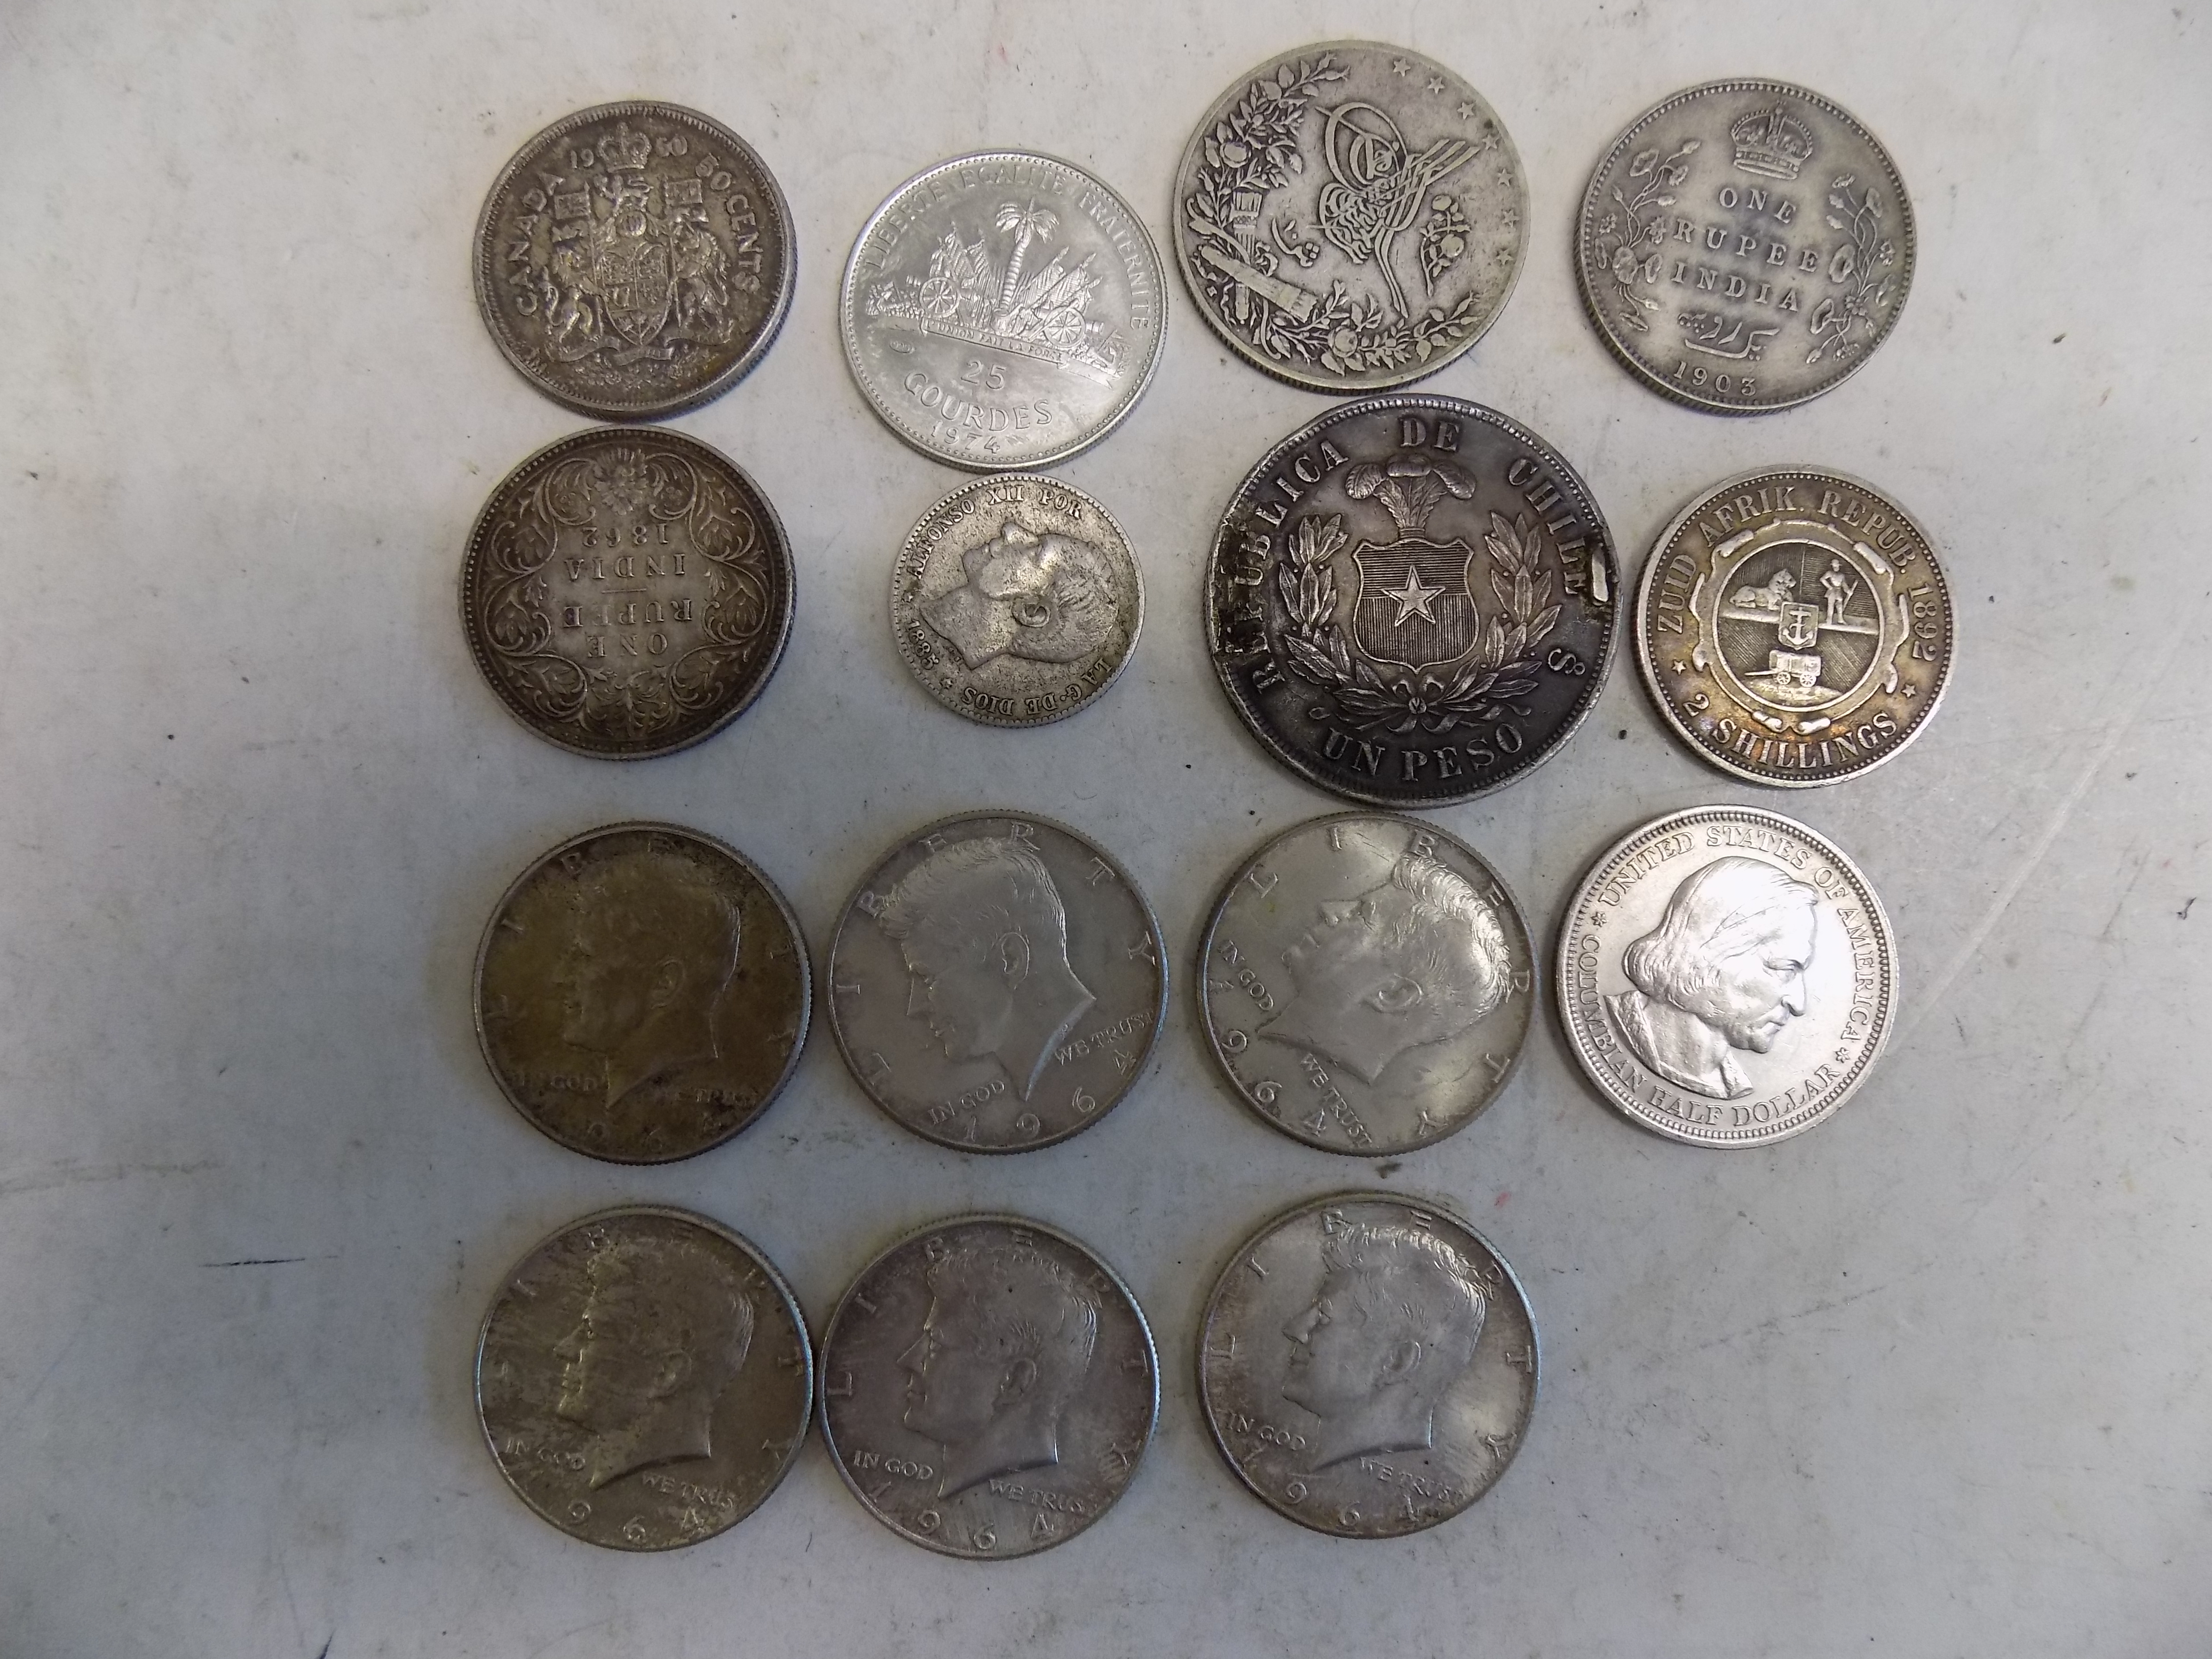 Six U.S.A. 1964 half dollars, a Chile Peso (mounted) and other silver coins.